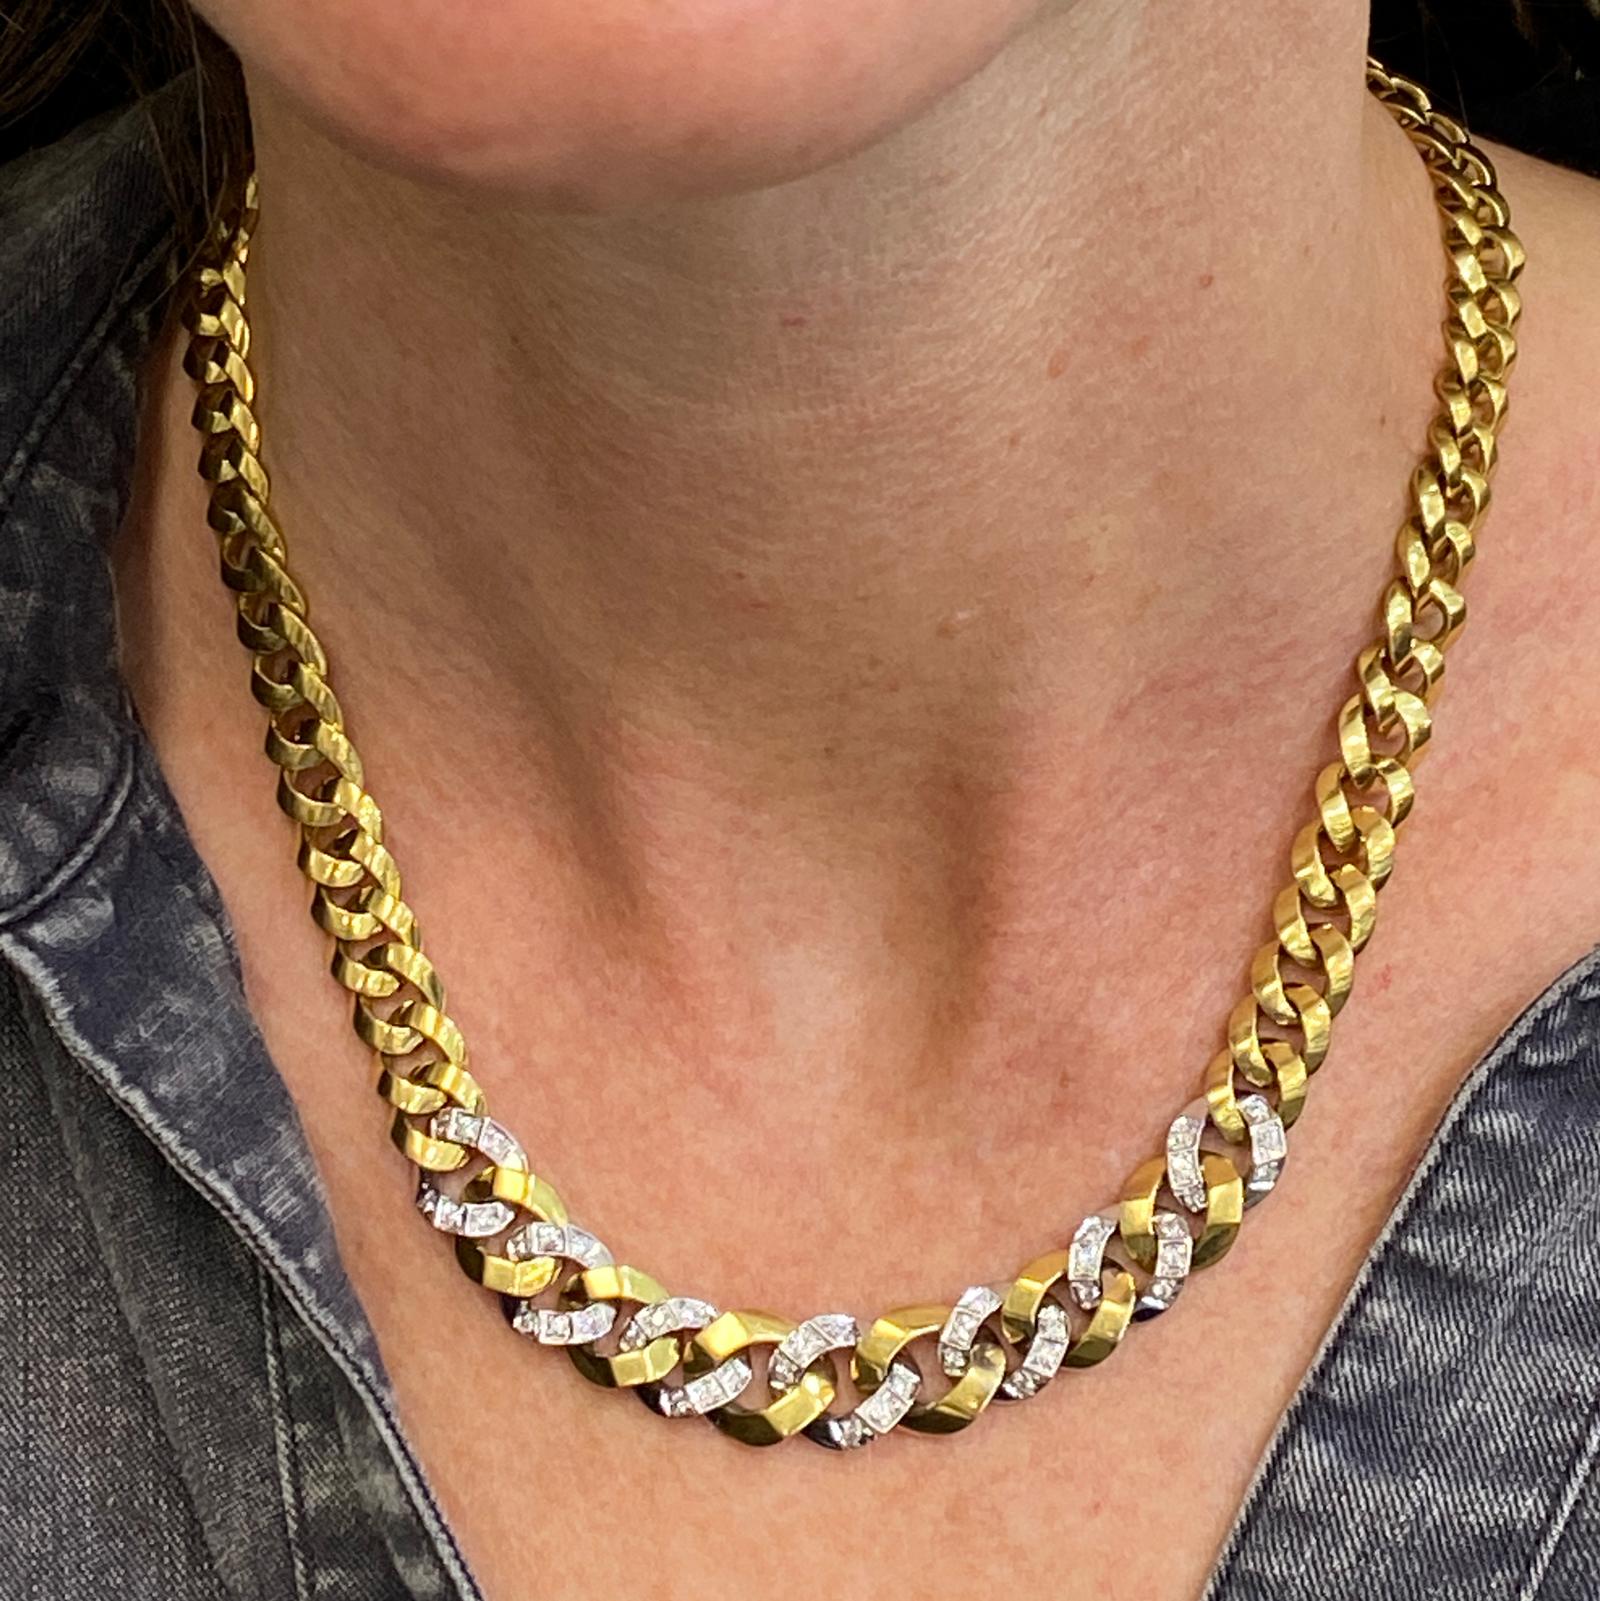 Diamond curb link necklace fashioned in 18 karat yellow and white gold. The necklace features 60 round brilliant cut diamonds weighing 1.50 carat total weight and graded H-I color and SI1 clarity. The tapered links are solid gold, and the necklace